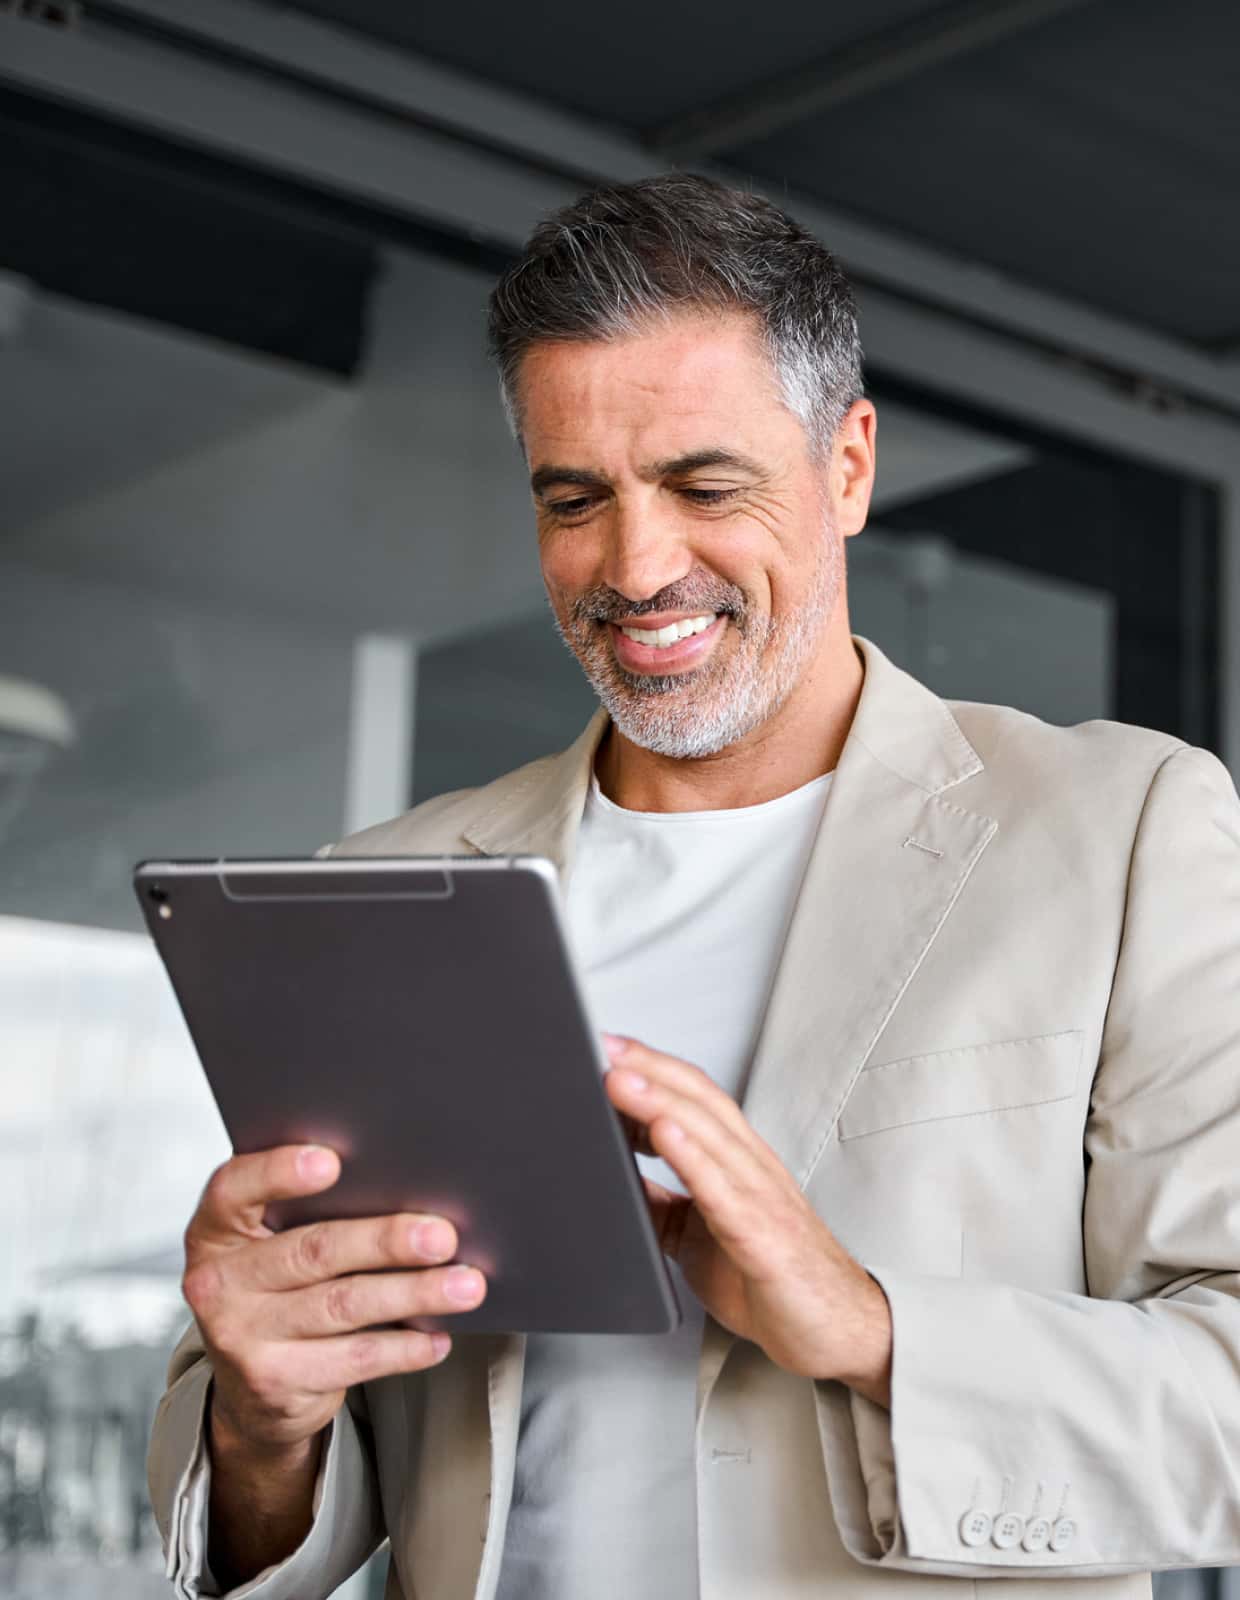 A man in a collared shit and sweater holding a tablet looks off camera.